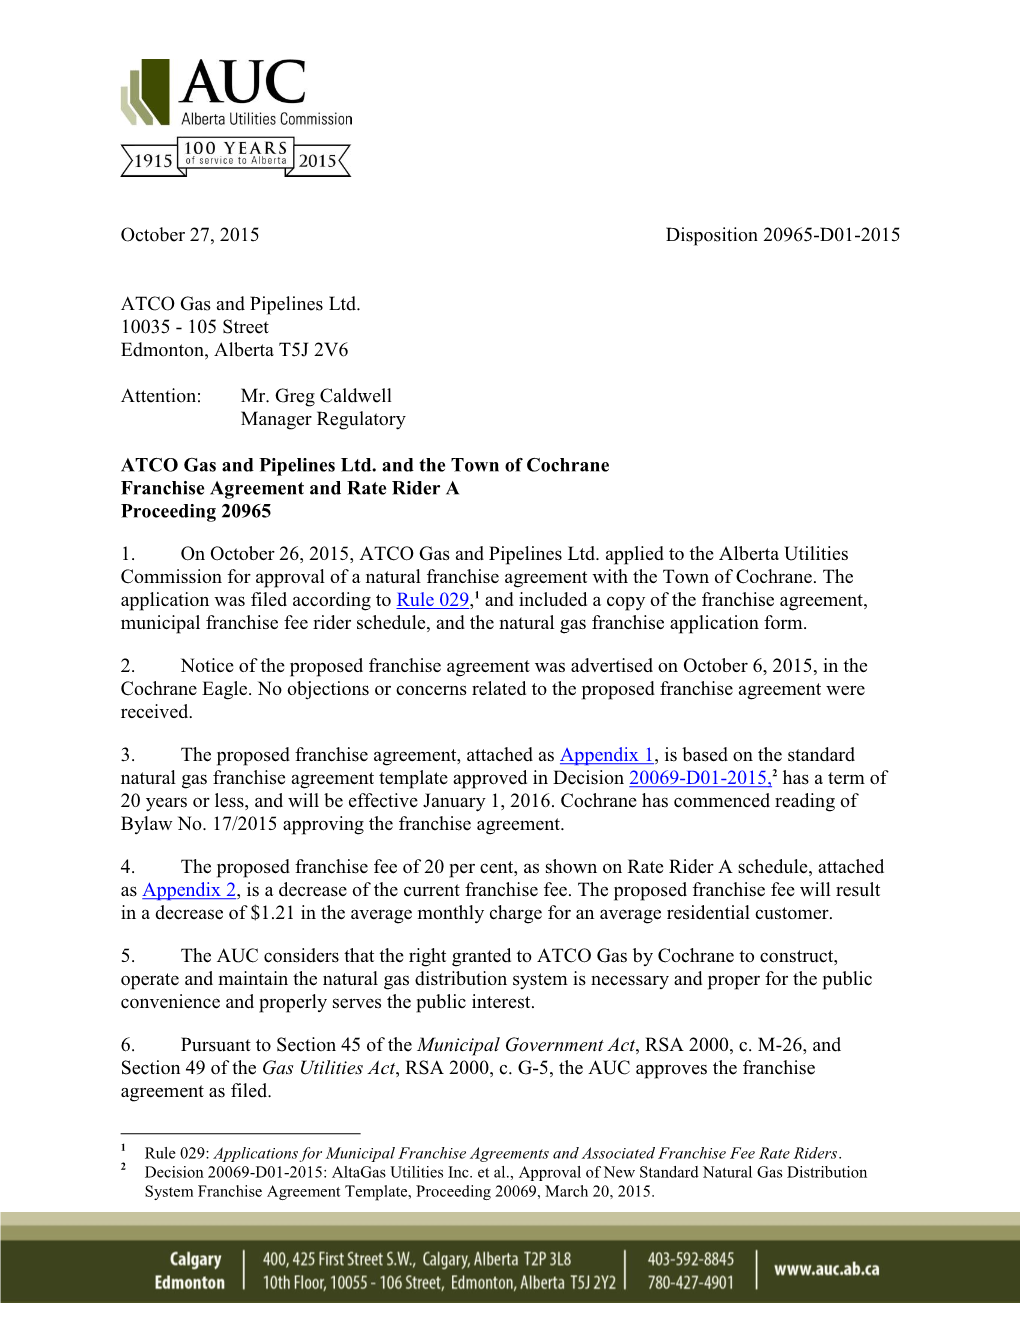 20965-D01-2015 AGPL and the Town of Cochrane Franchise Agreement